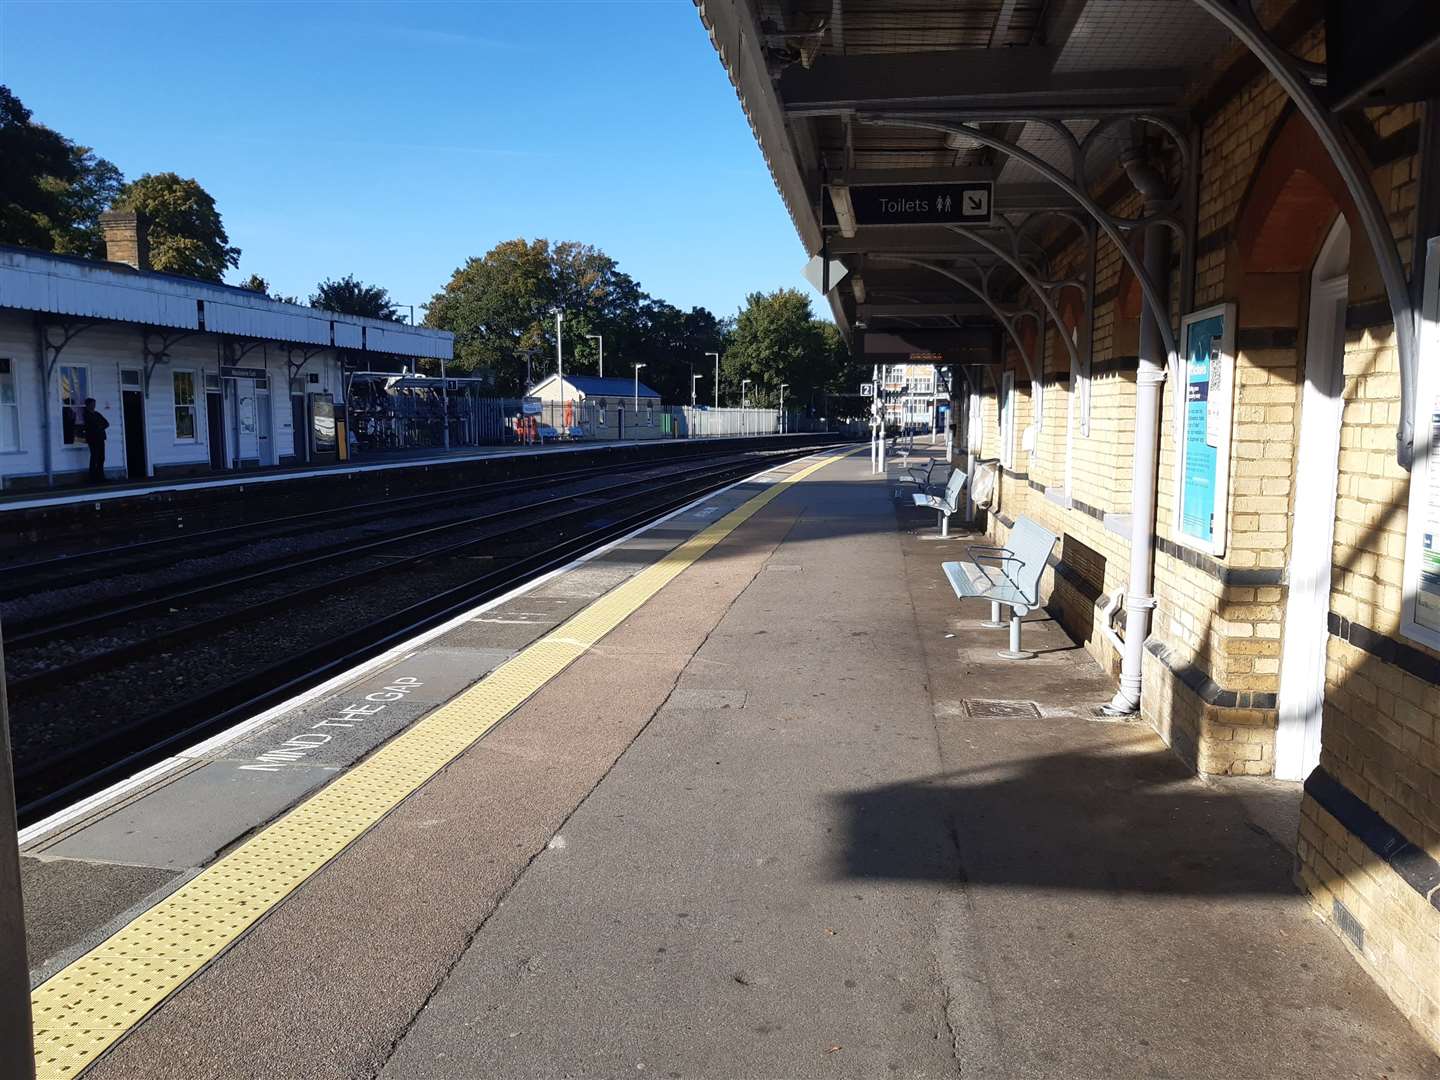 The rail strikes will leave more than 130 stations empty